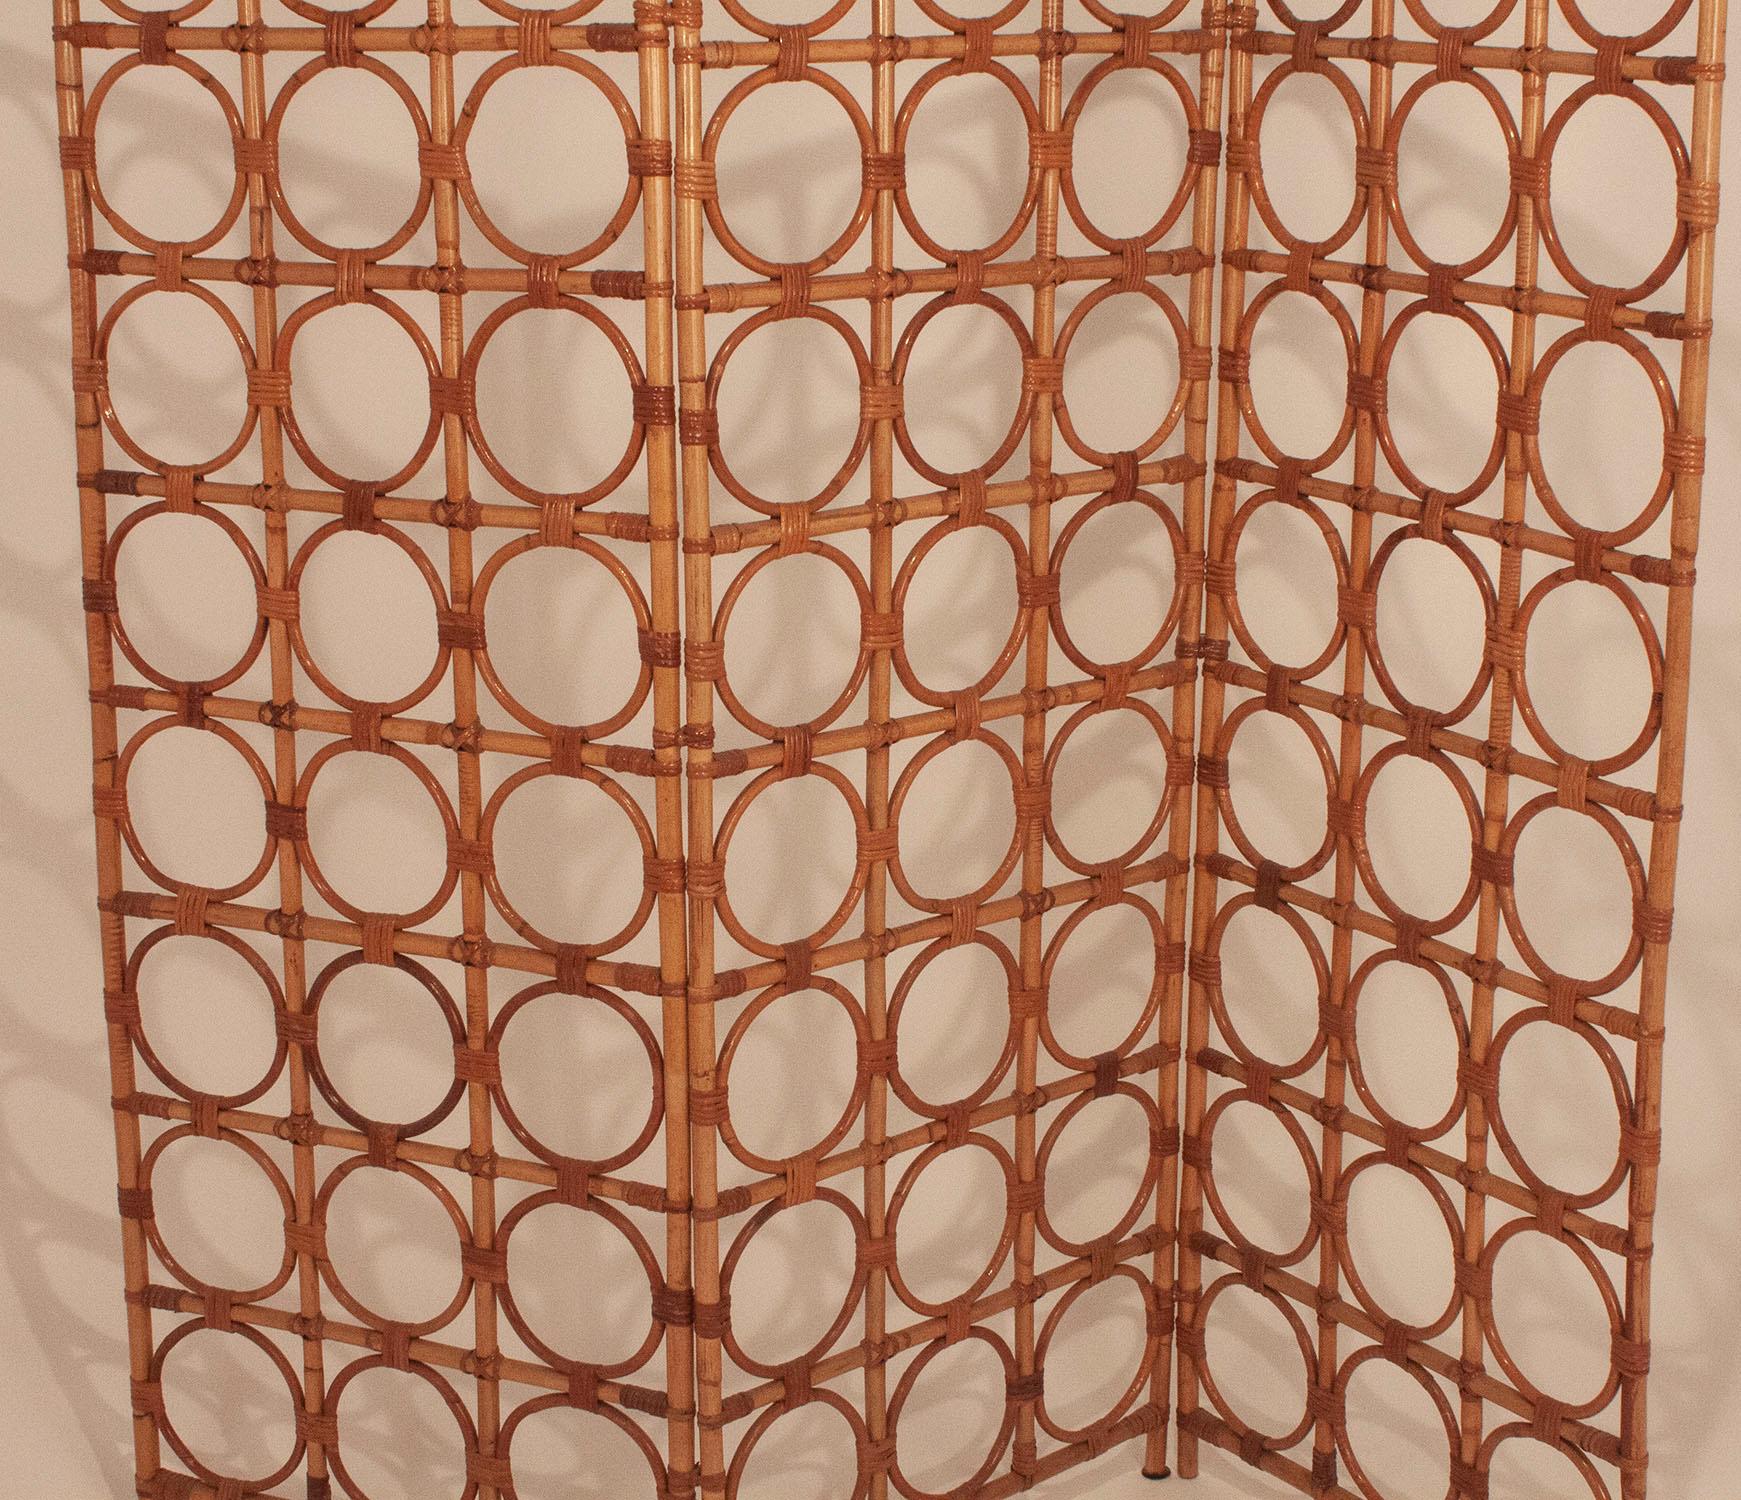 Bamboo screen, Room divider . Circa 1970. Spain.
There is nothing metal, the same bamboo acts as a hinge.
It is in very good condition .
This type of material was widely used in the decoration of the 1970's.
This one particularly has a very